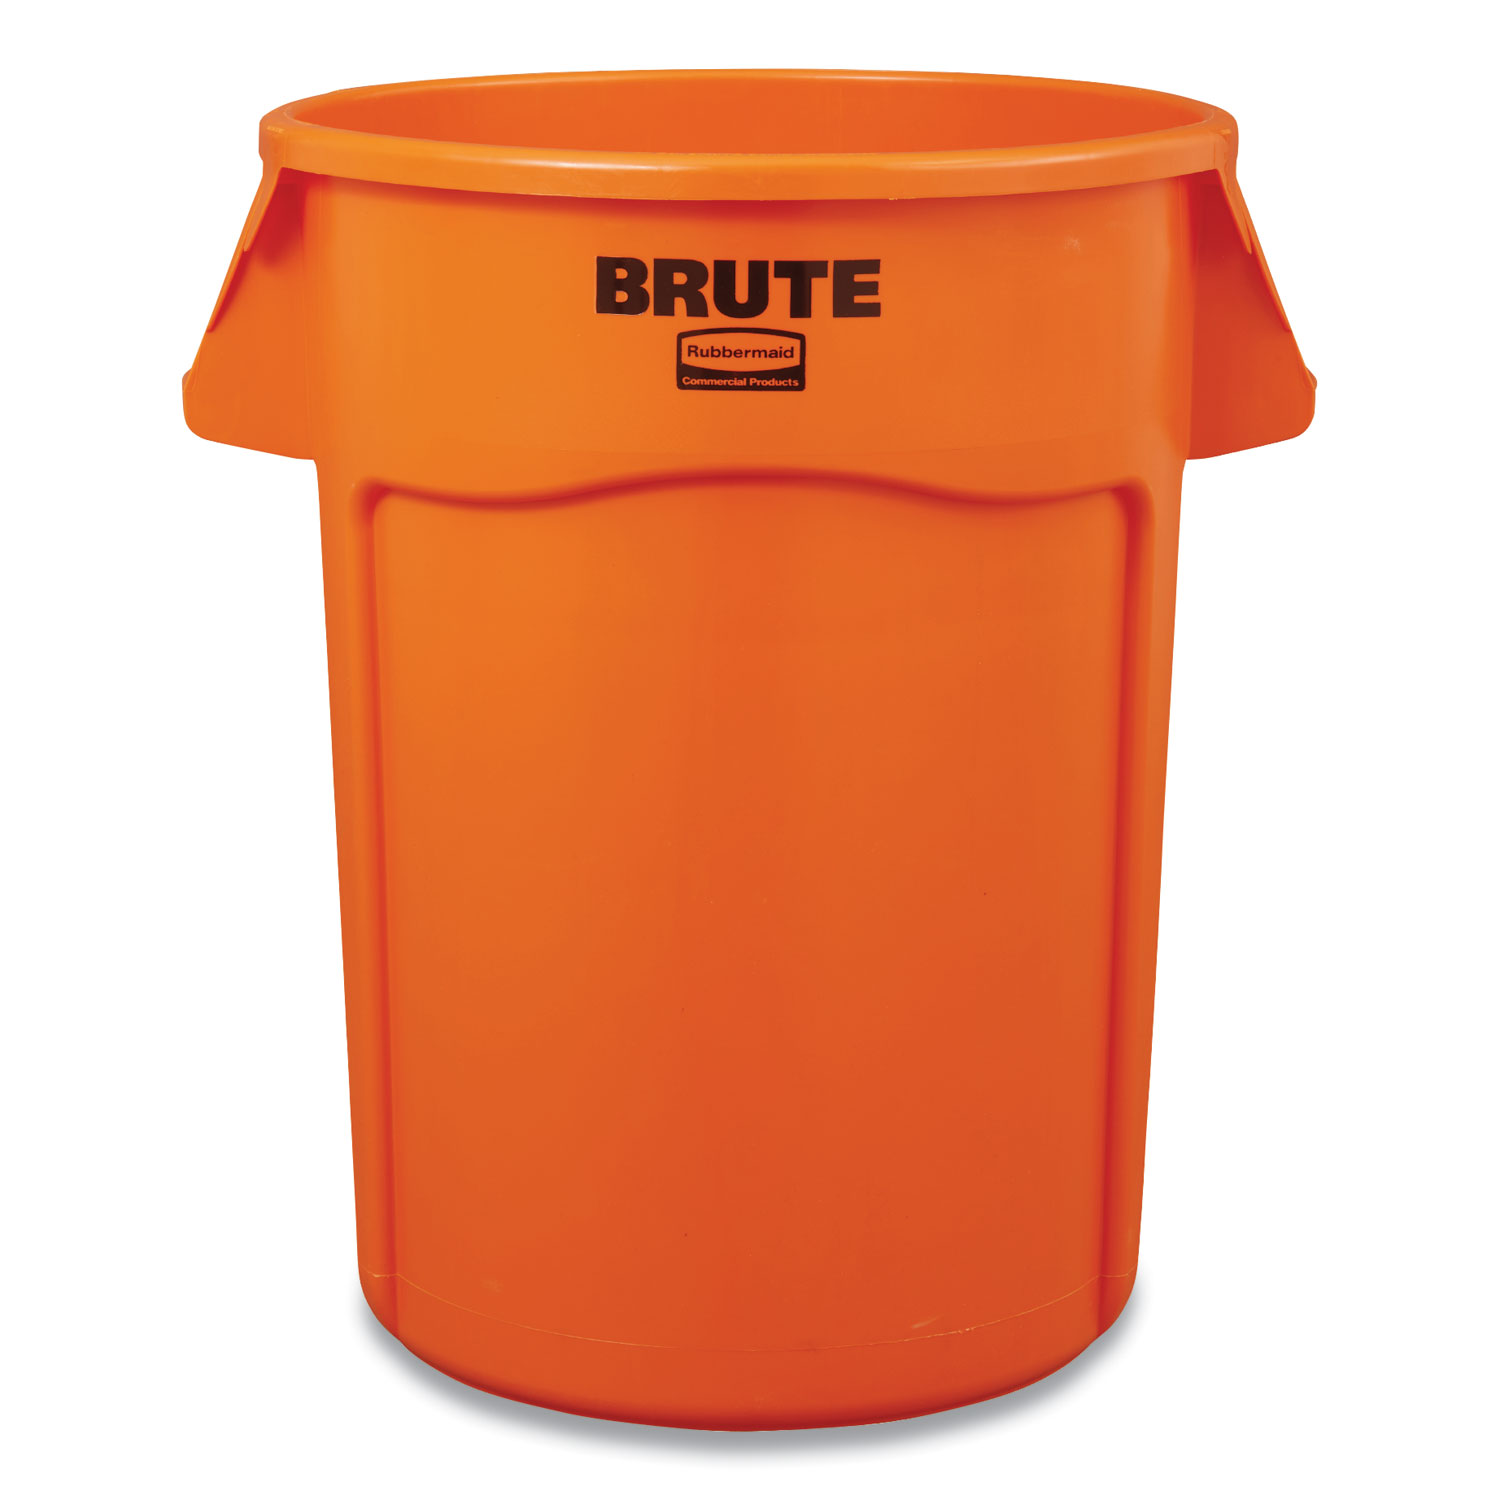  Rubbermaid Commercial 2119308 Brute Round Containers, 32 gal, Orange (RCP2119308) 